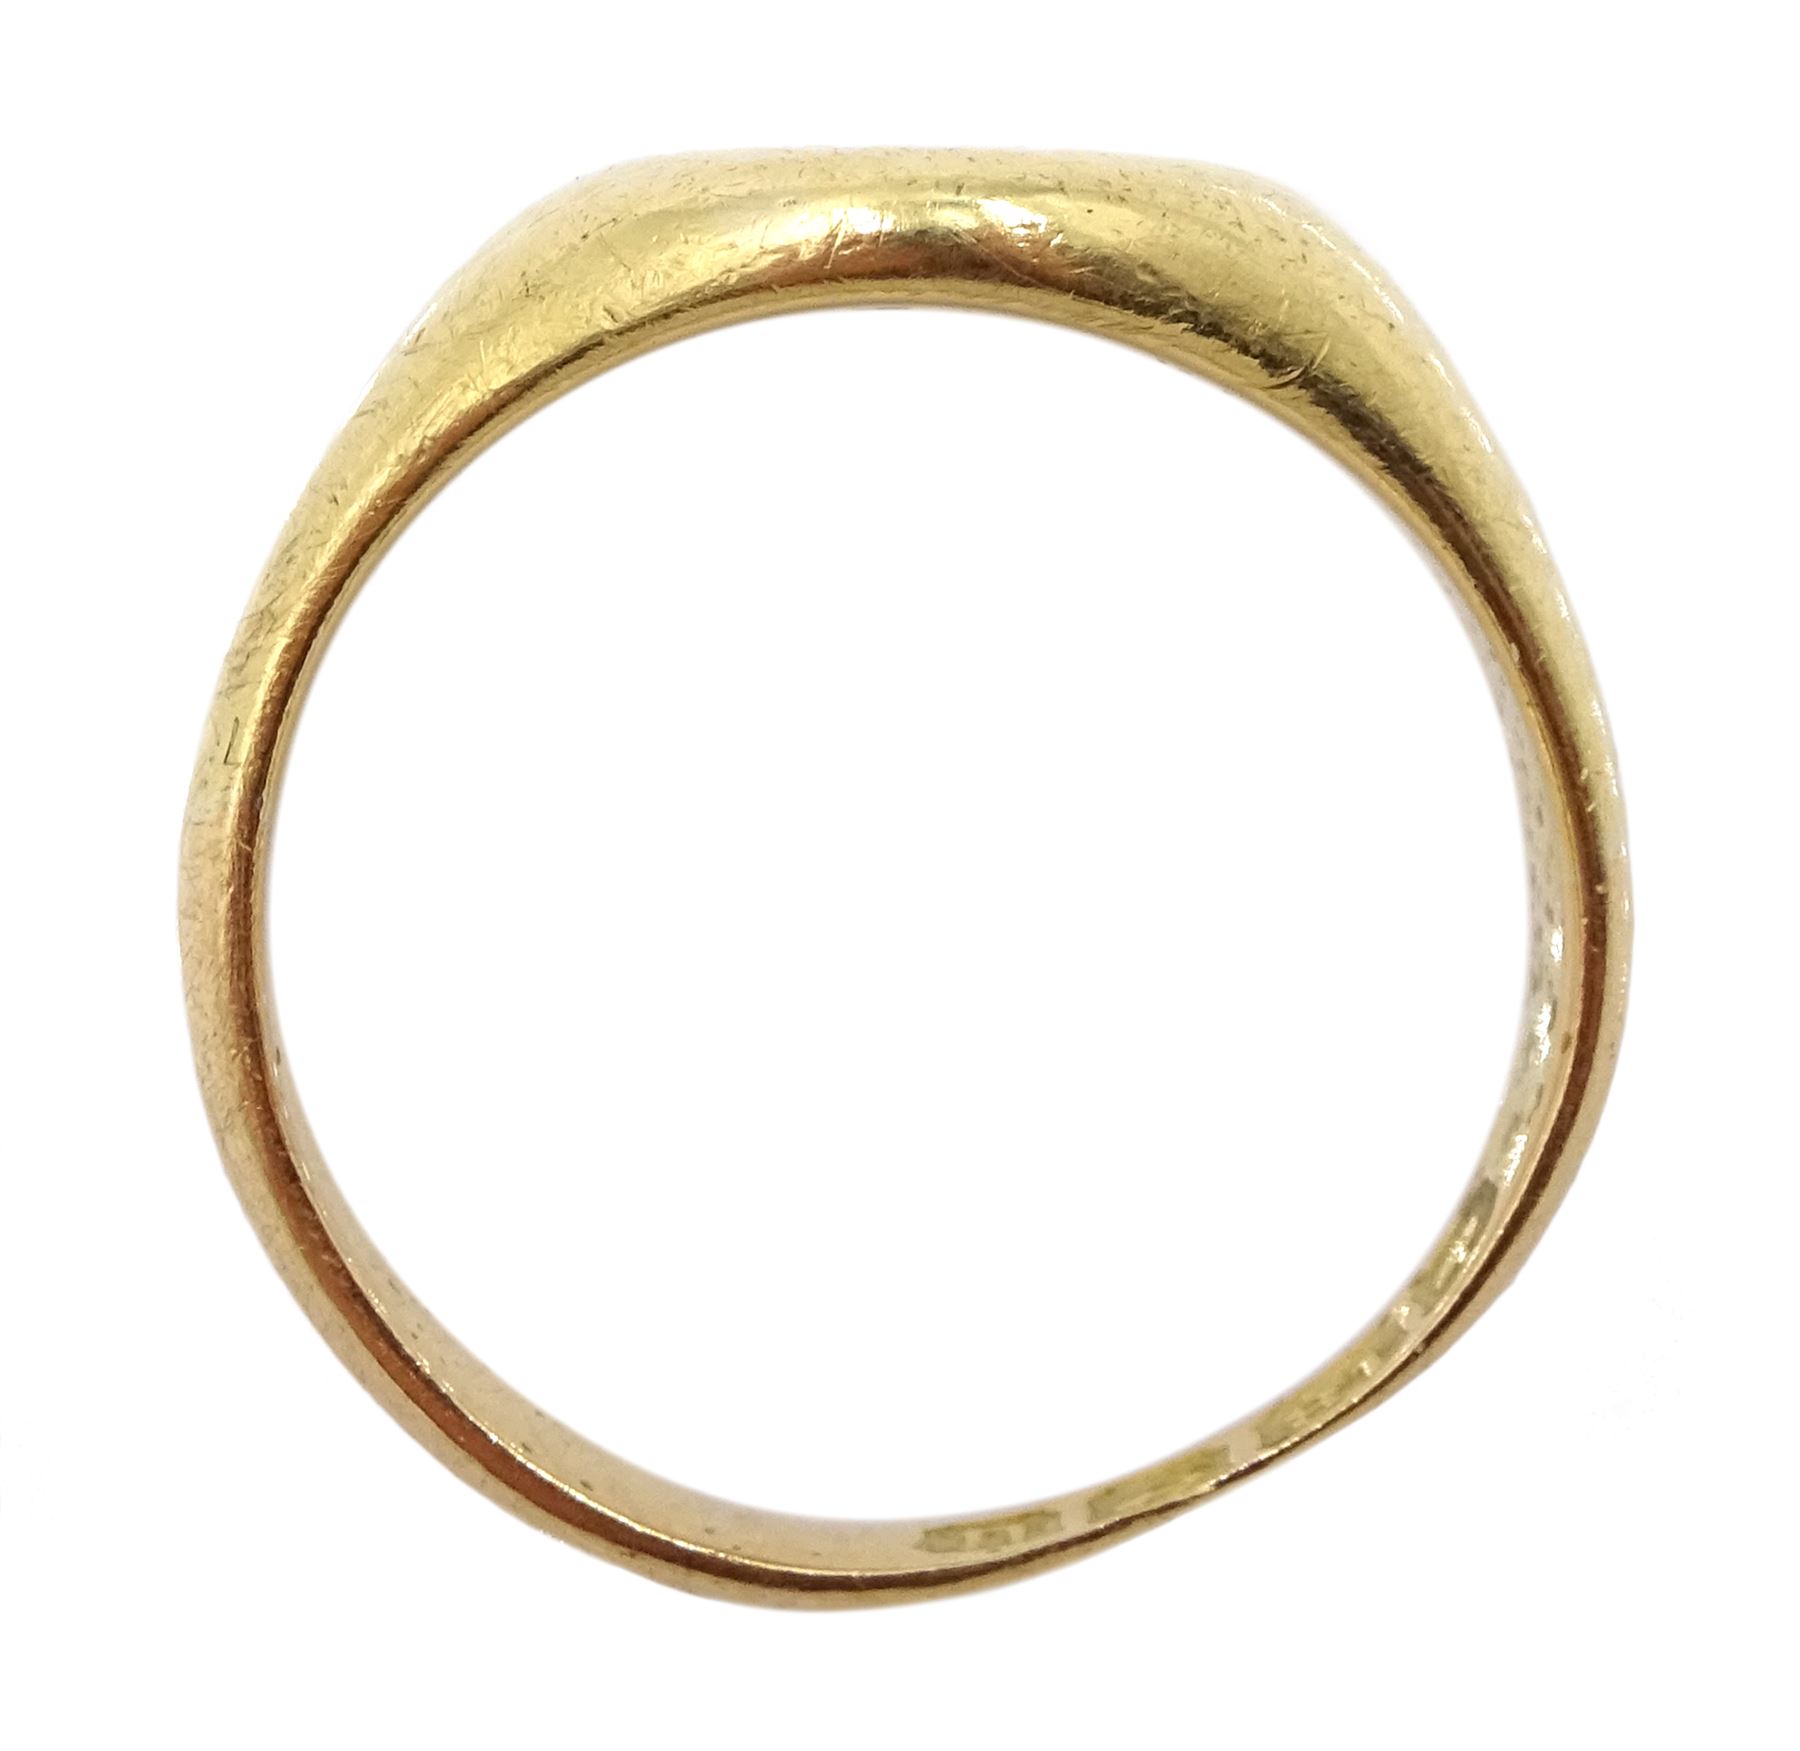 Early 20th century 18ct gold signet ring - Image 3 of 3